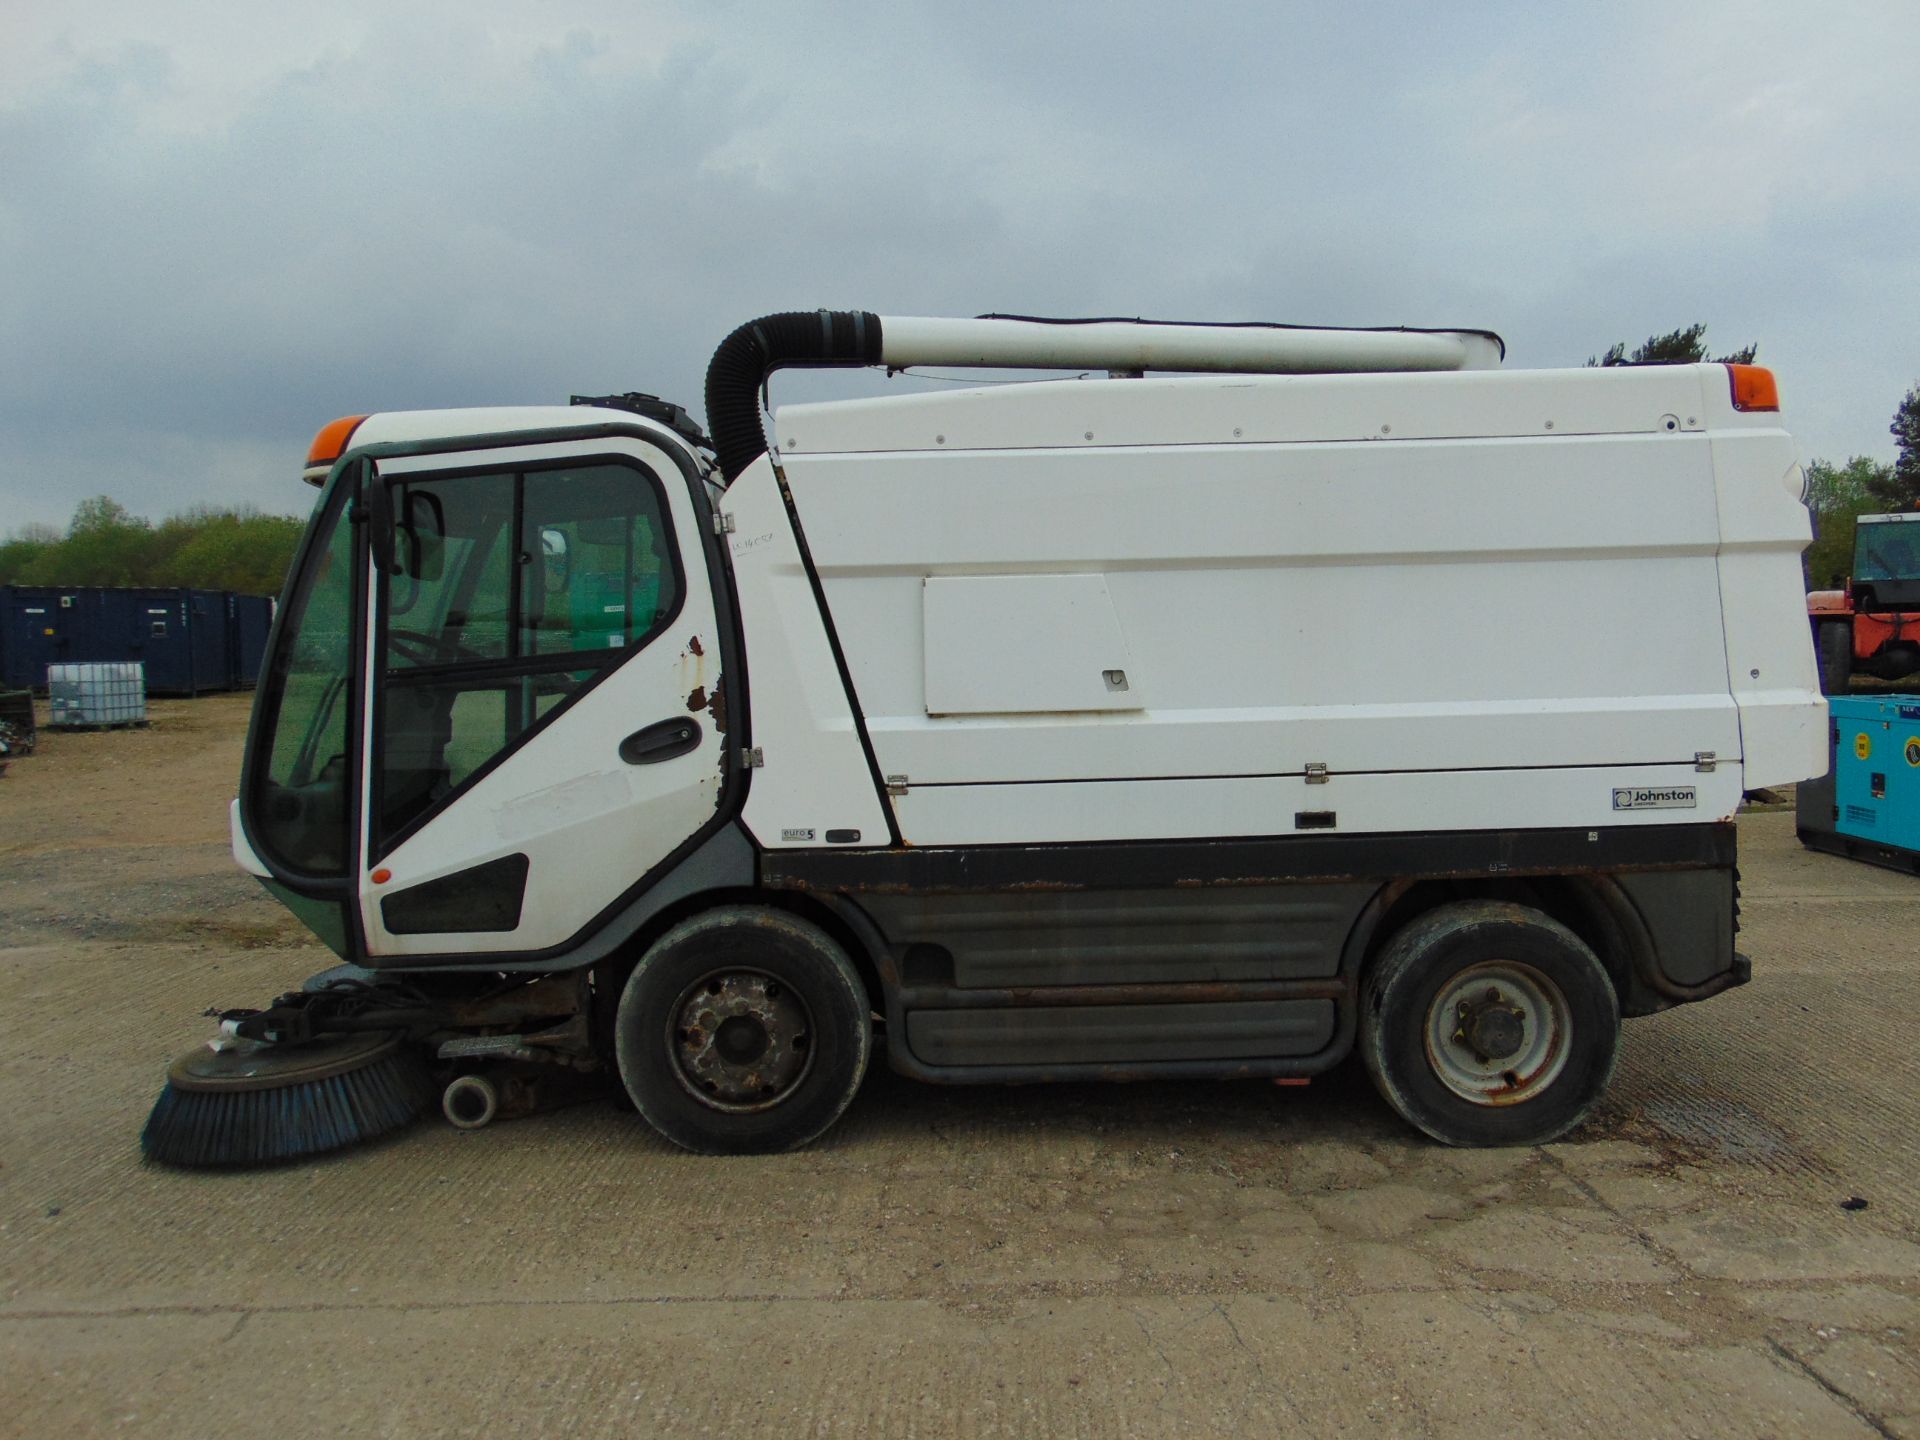 2015 Johnston CX400 EURO 5 Road Sweeper - Image 2 of 28